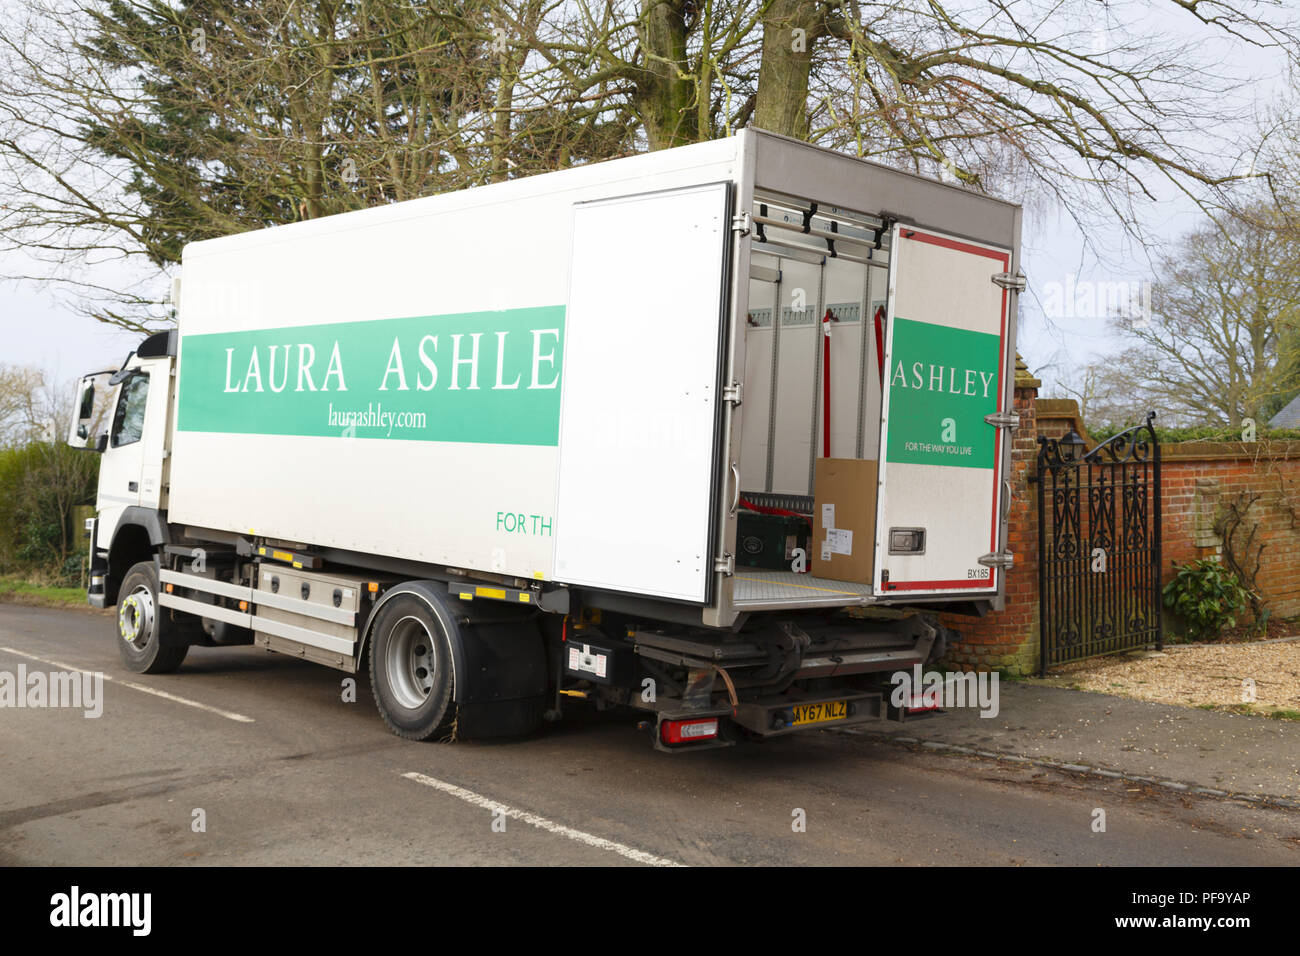 Buckingham, UK - February 06, 2018. Laura Ashley makes a delivery to a house in Buckinghamshire. Shares in Laura Ashley have fallen 90% since 2015 Stock Photo